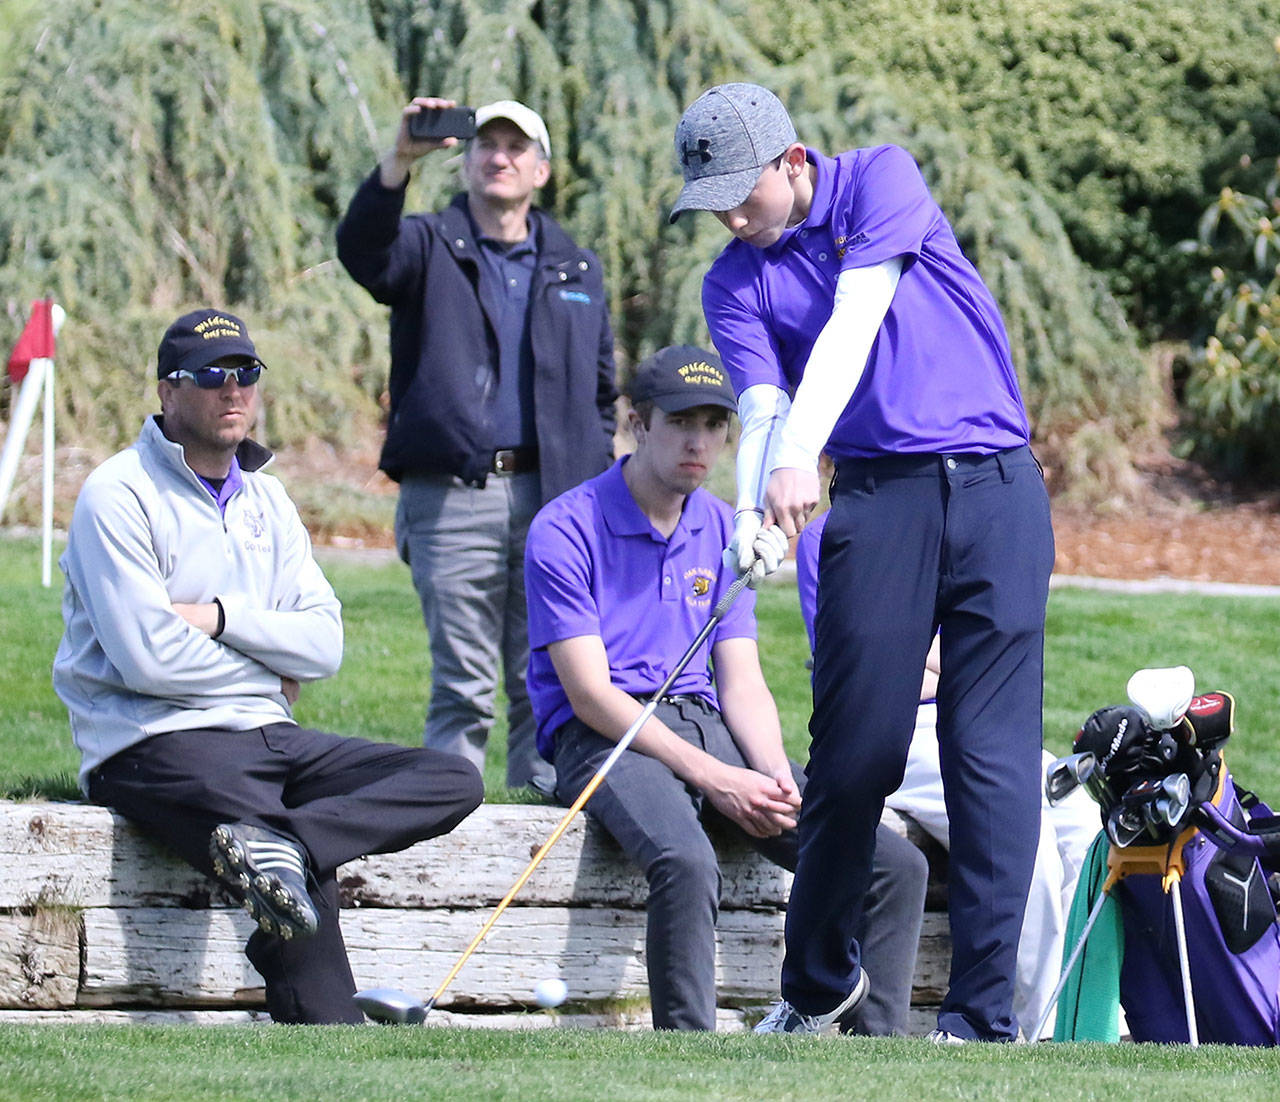 With coach David Smith looking on, Nate Thompson tees off for the Wildcats. (Photo by John Fisken)